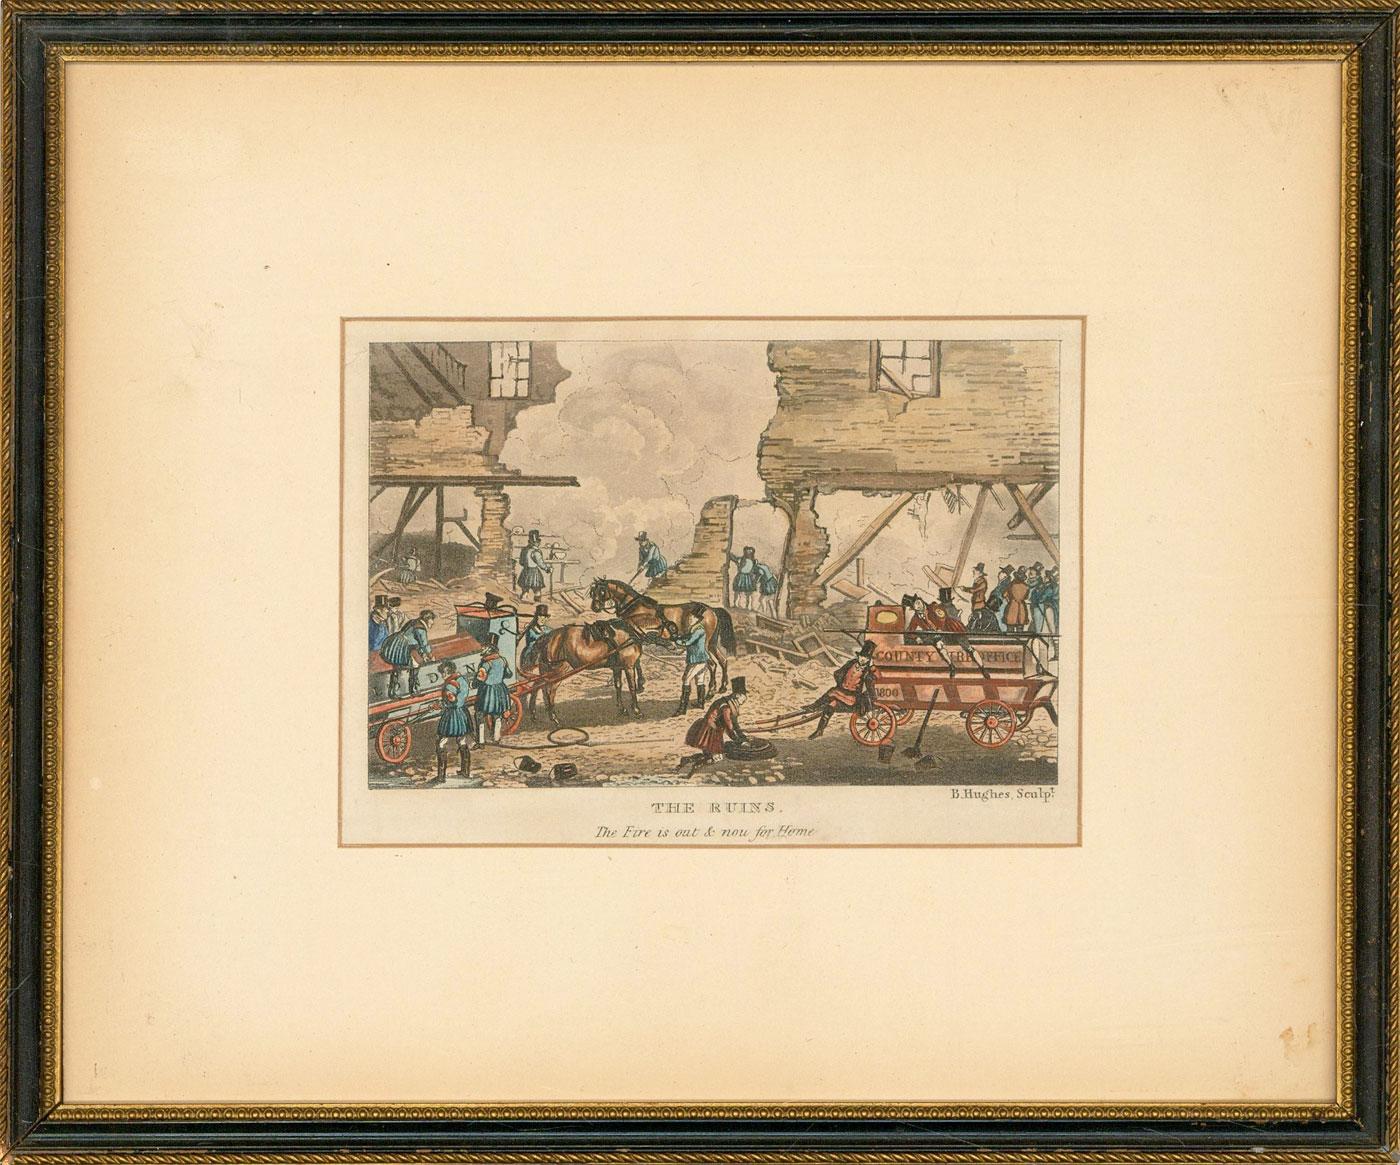 A set of four hand-coloured lithographs after drawings from H. Alken and sculpture from B. Hughes.

The lithographs tell the story of Victorian firemen extinguishing a fire, and each is inscribed with a small line describing the scene.

Well